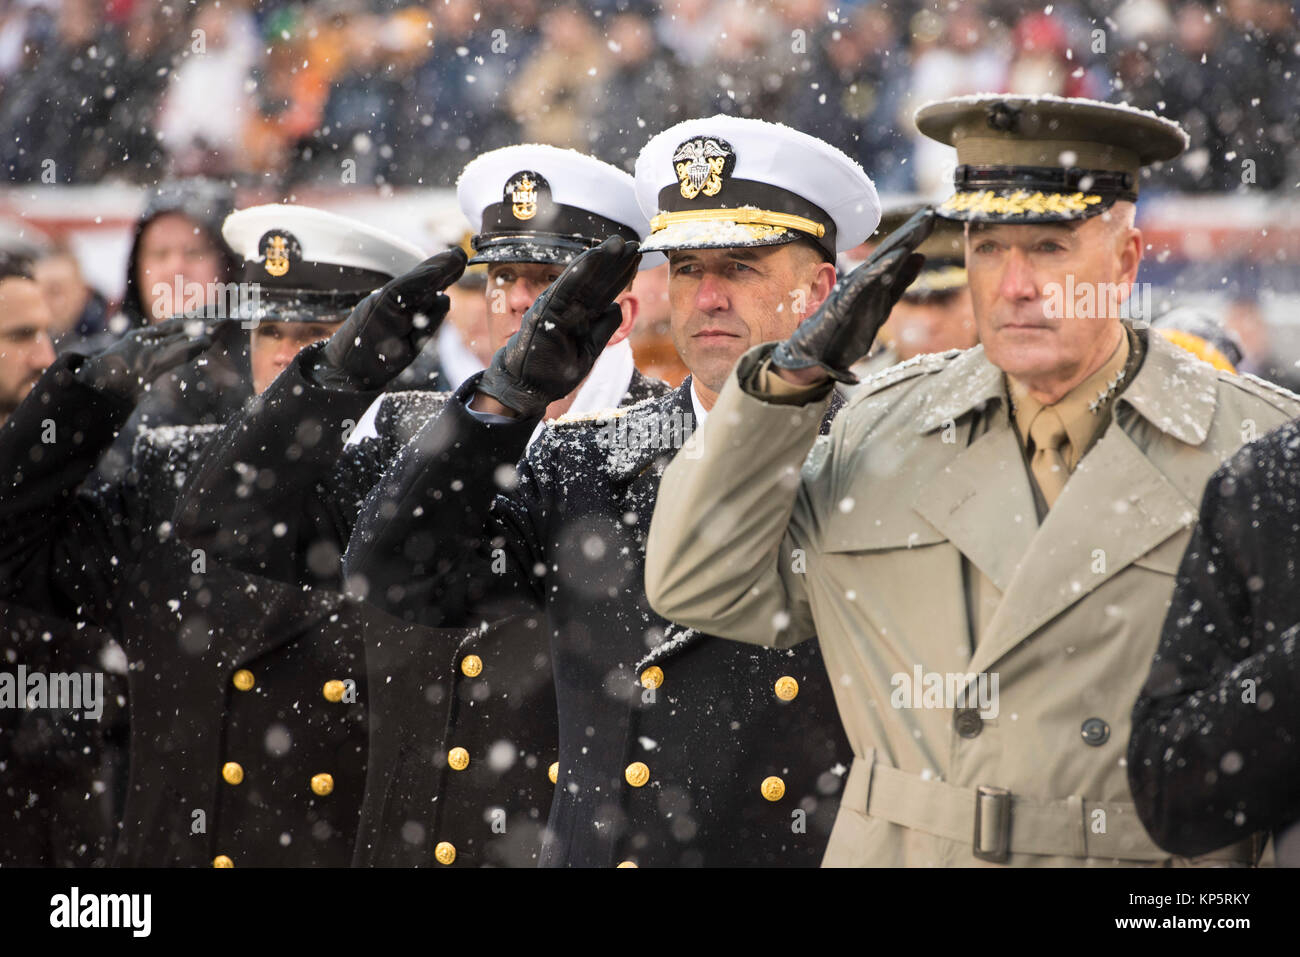 U.S. Naval Academy Command Master Chief Jeffrey Kirby (left), U.S. Navy Master Chief Petty Officer Steven Giordano, U.S. Chief of Naval Operations John Richardson, and U.S. Joint Chiefs of Staff Chairman Joseph Dunford salute during the national anthem at the U.S. Army Military Academy West Point Black Knights versus U.S. Naval Academy Navy Midshipmen football game at the Lincoln Financial Field December 9, 2017 in Philadelphia, Pennsylvania.  (photo by Nathan Laird via Planetpix) Stock Photo